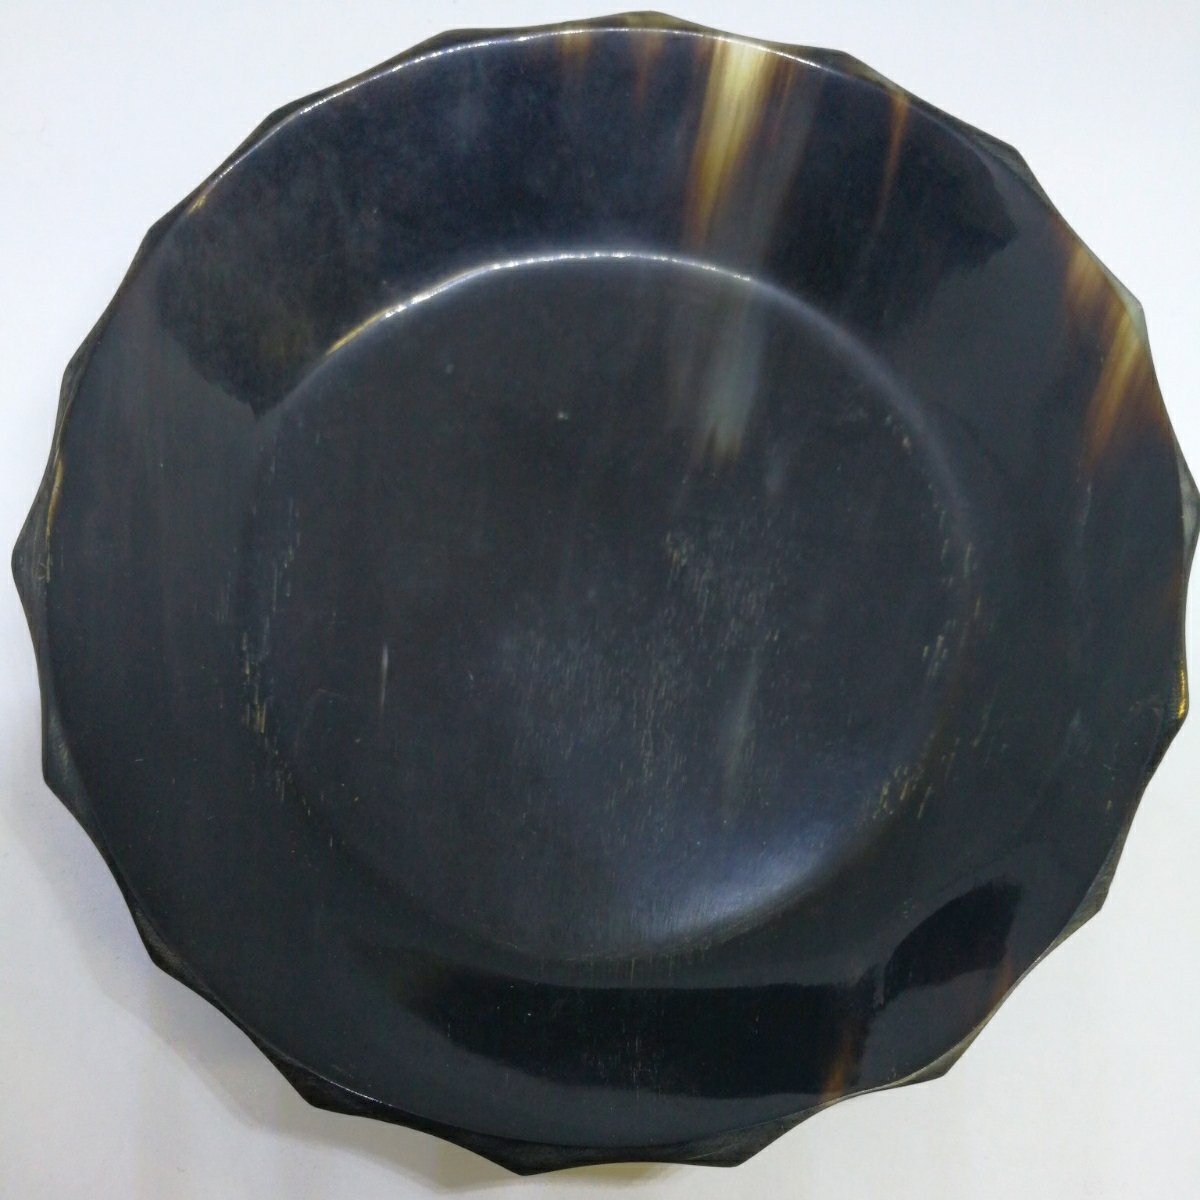  water cow. angle Buffalo horn hand made tray dish 10ke half-price and downward free shipping diameter 17CM height 2.5cm pot plate India ethnic new goods unused dish 